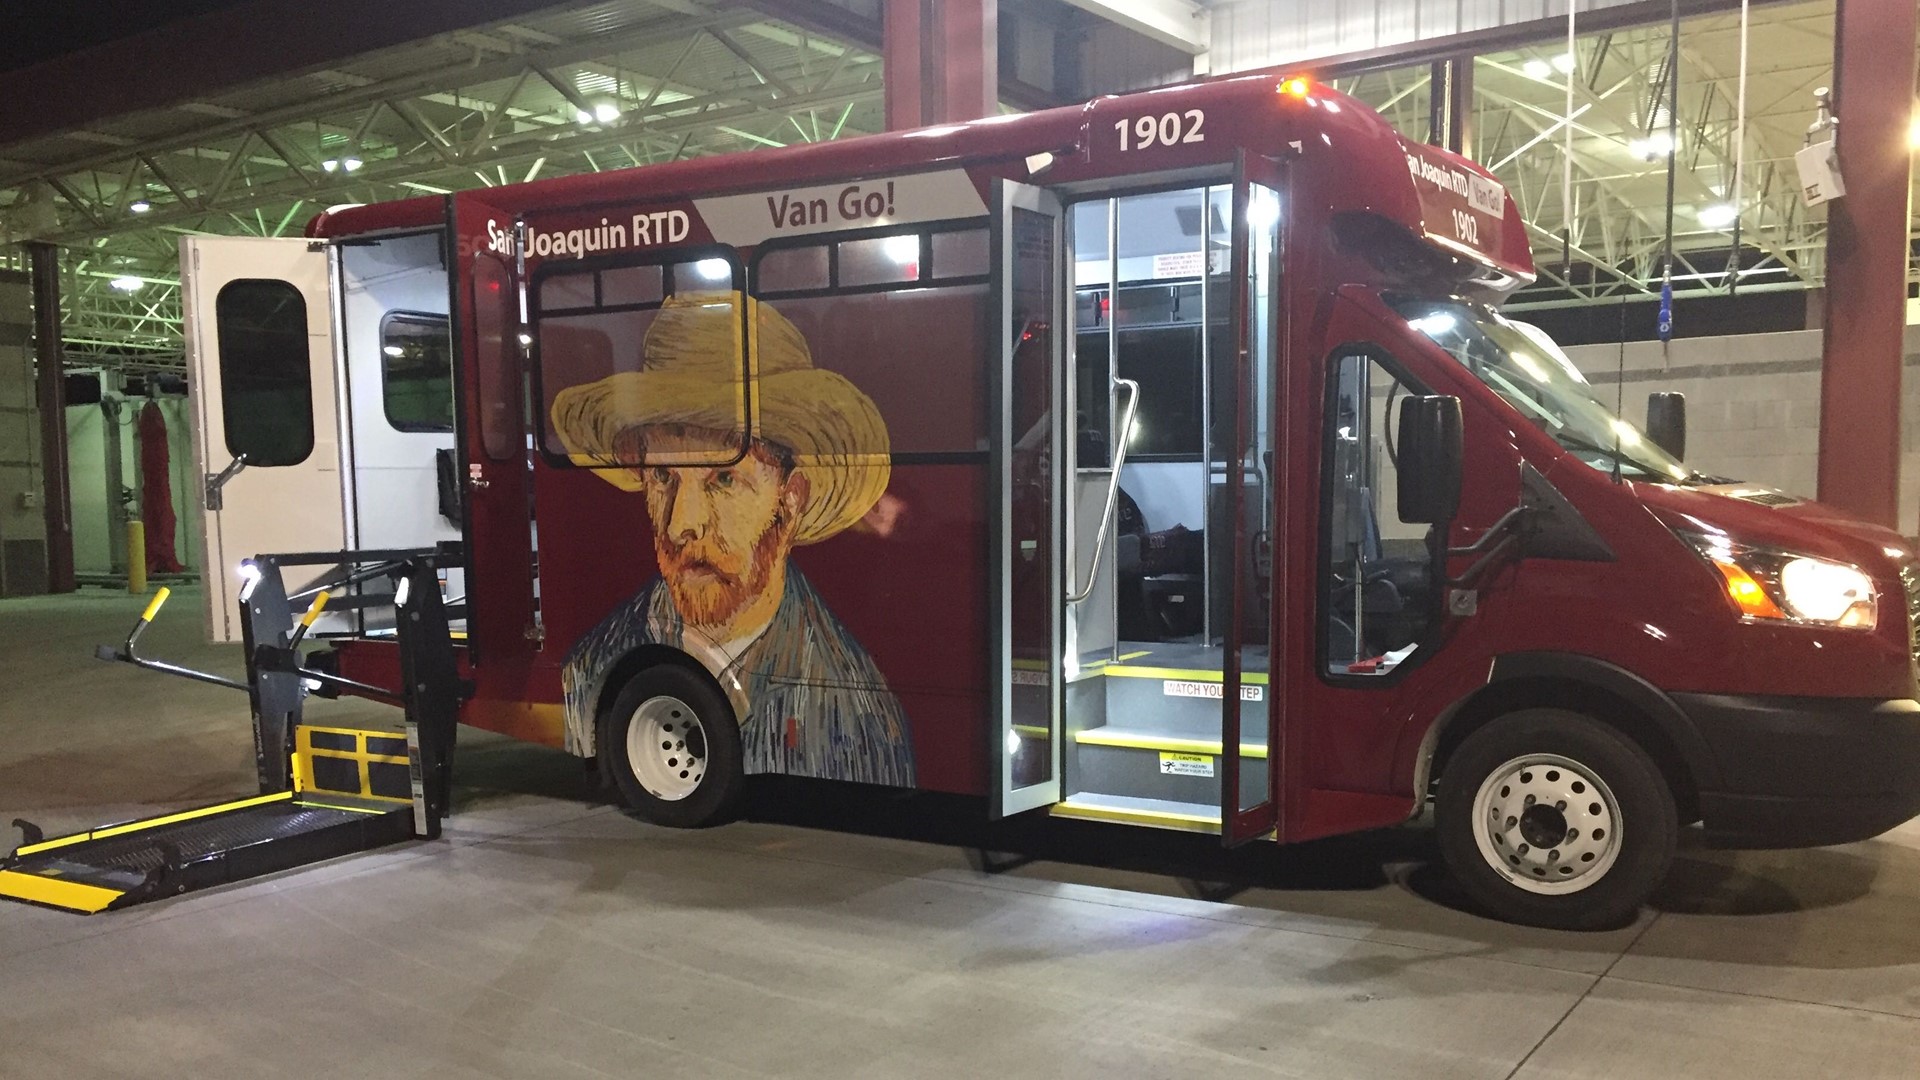 As of March 12, the service area includes Clements, Woodbridge, Linden, Lodi, Lockeford, and North Stockton, but the RTD is hoping to add more locations soon.